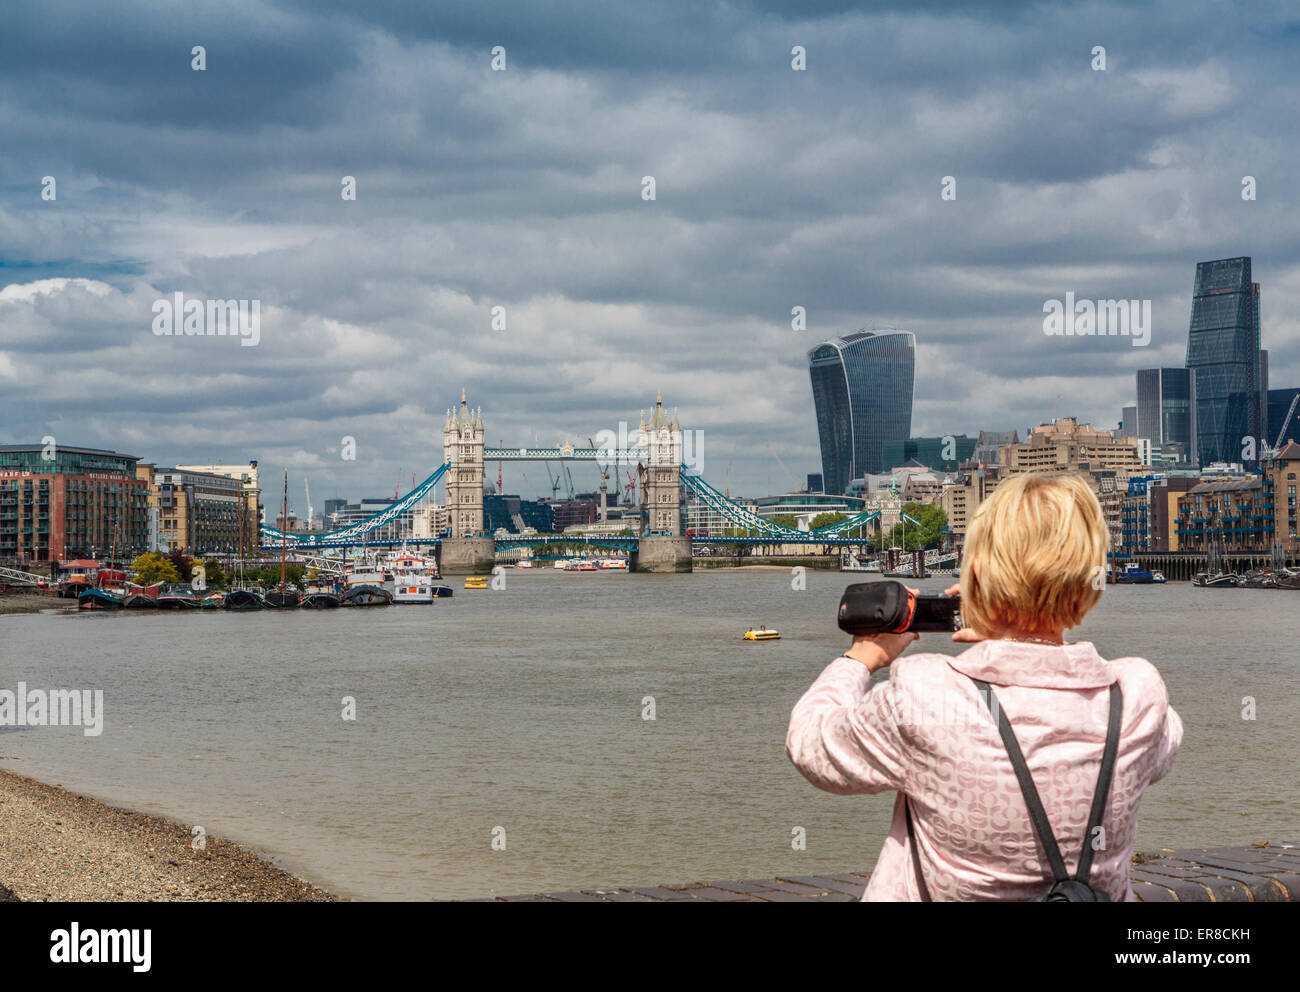 A Tourist taking a photograph of The River Thames looking West towards Tower Bridge and the Walkie Talkie Building, London, UK Stock Photo